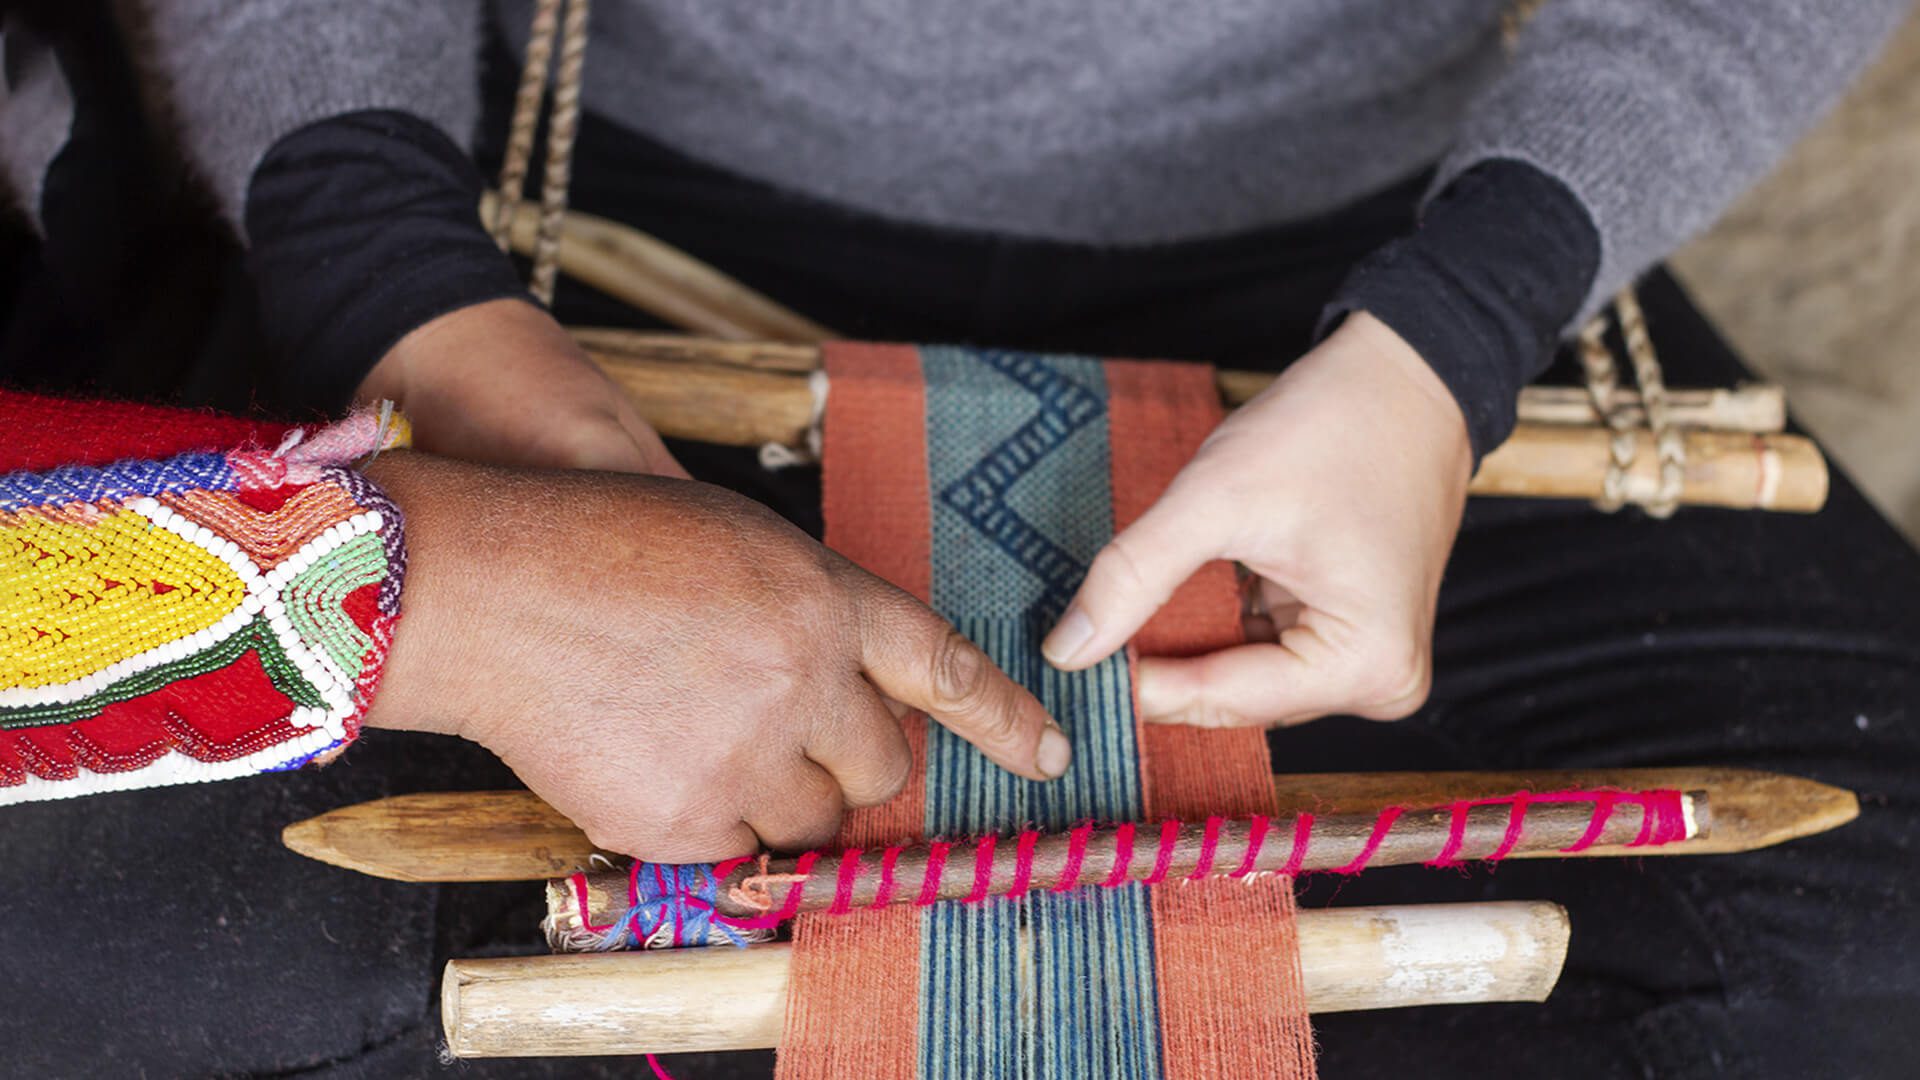 Ultimately you will create a piece with your own hands, with personalized instruction and close mentoring from the cooperative's artisans.